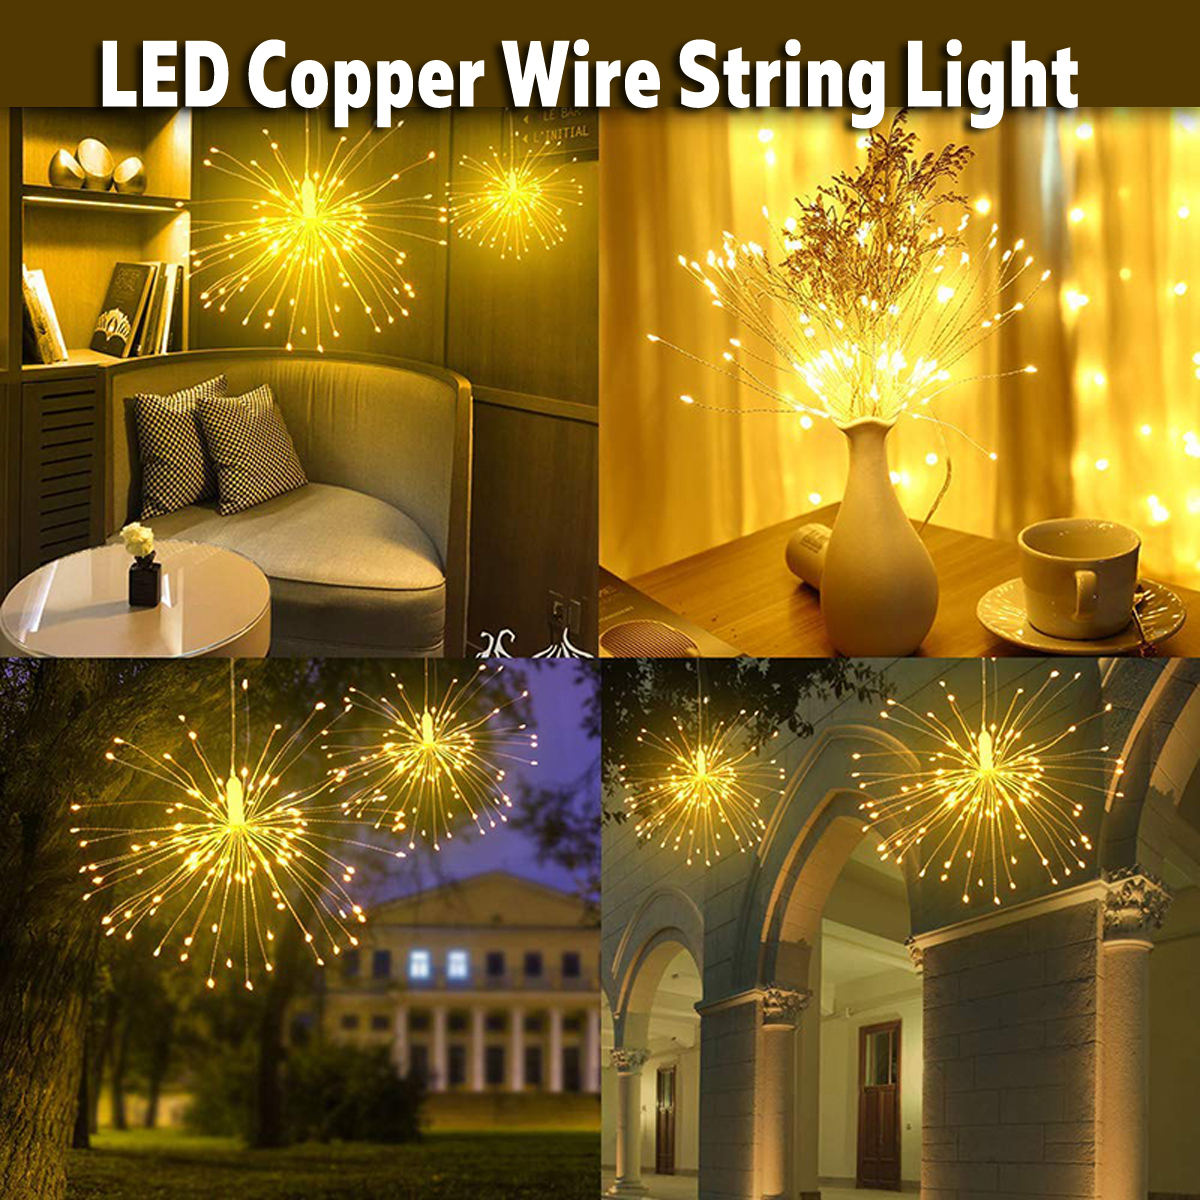 Dual-Powered-USB-Battery-150-LED-Starburst-String-Fairy-Light-Sliver-Wire-Wedding-Party-Home-Decor-1412924-10